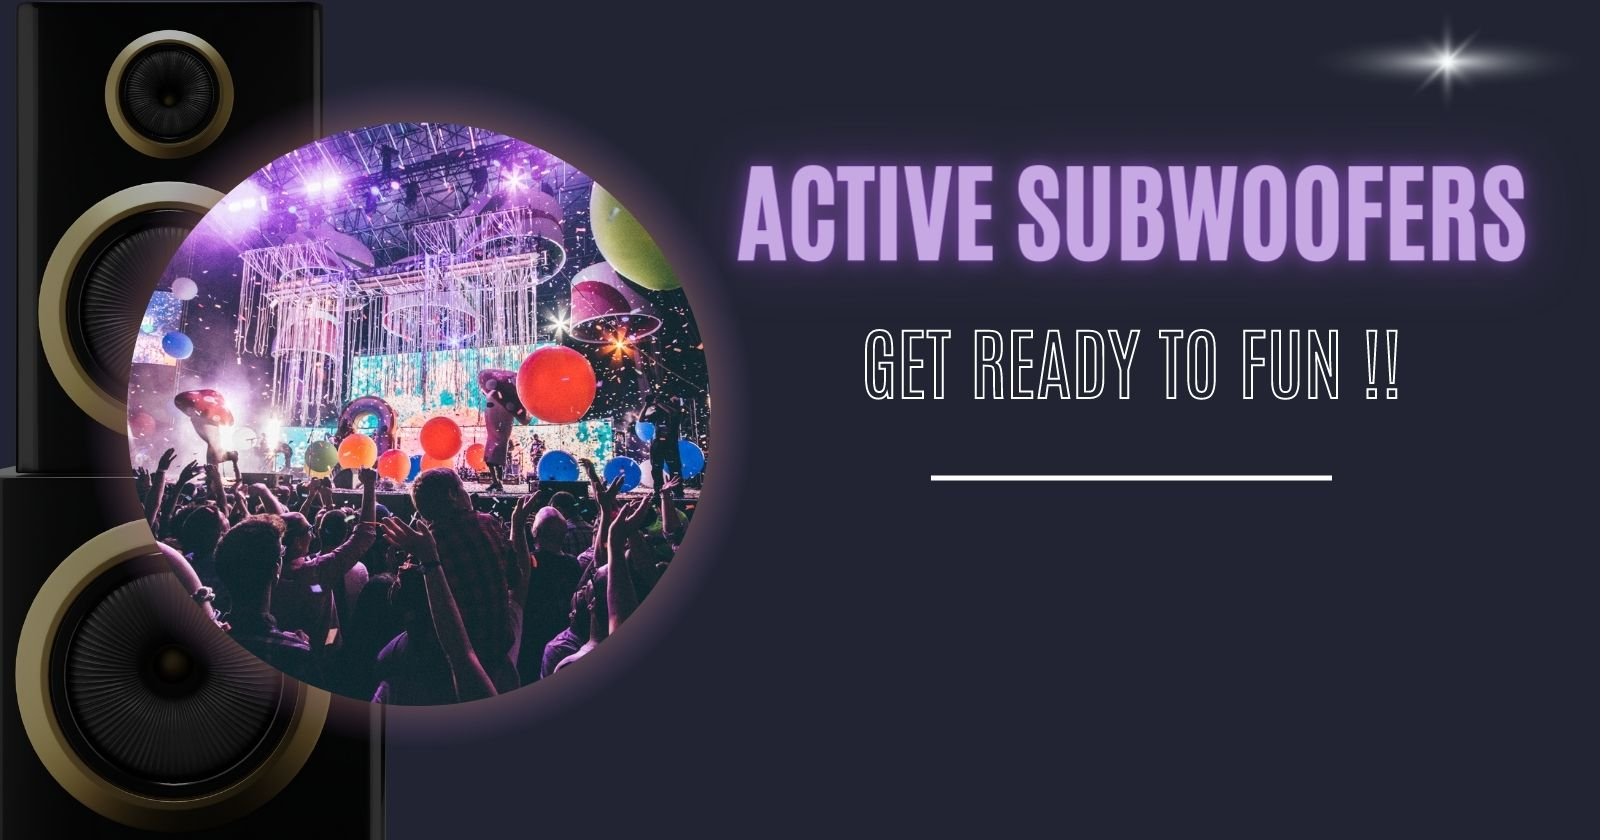 Picture of subwoofer with a text "Active Subwoofers, Get ready to fun"